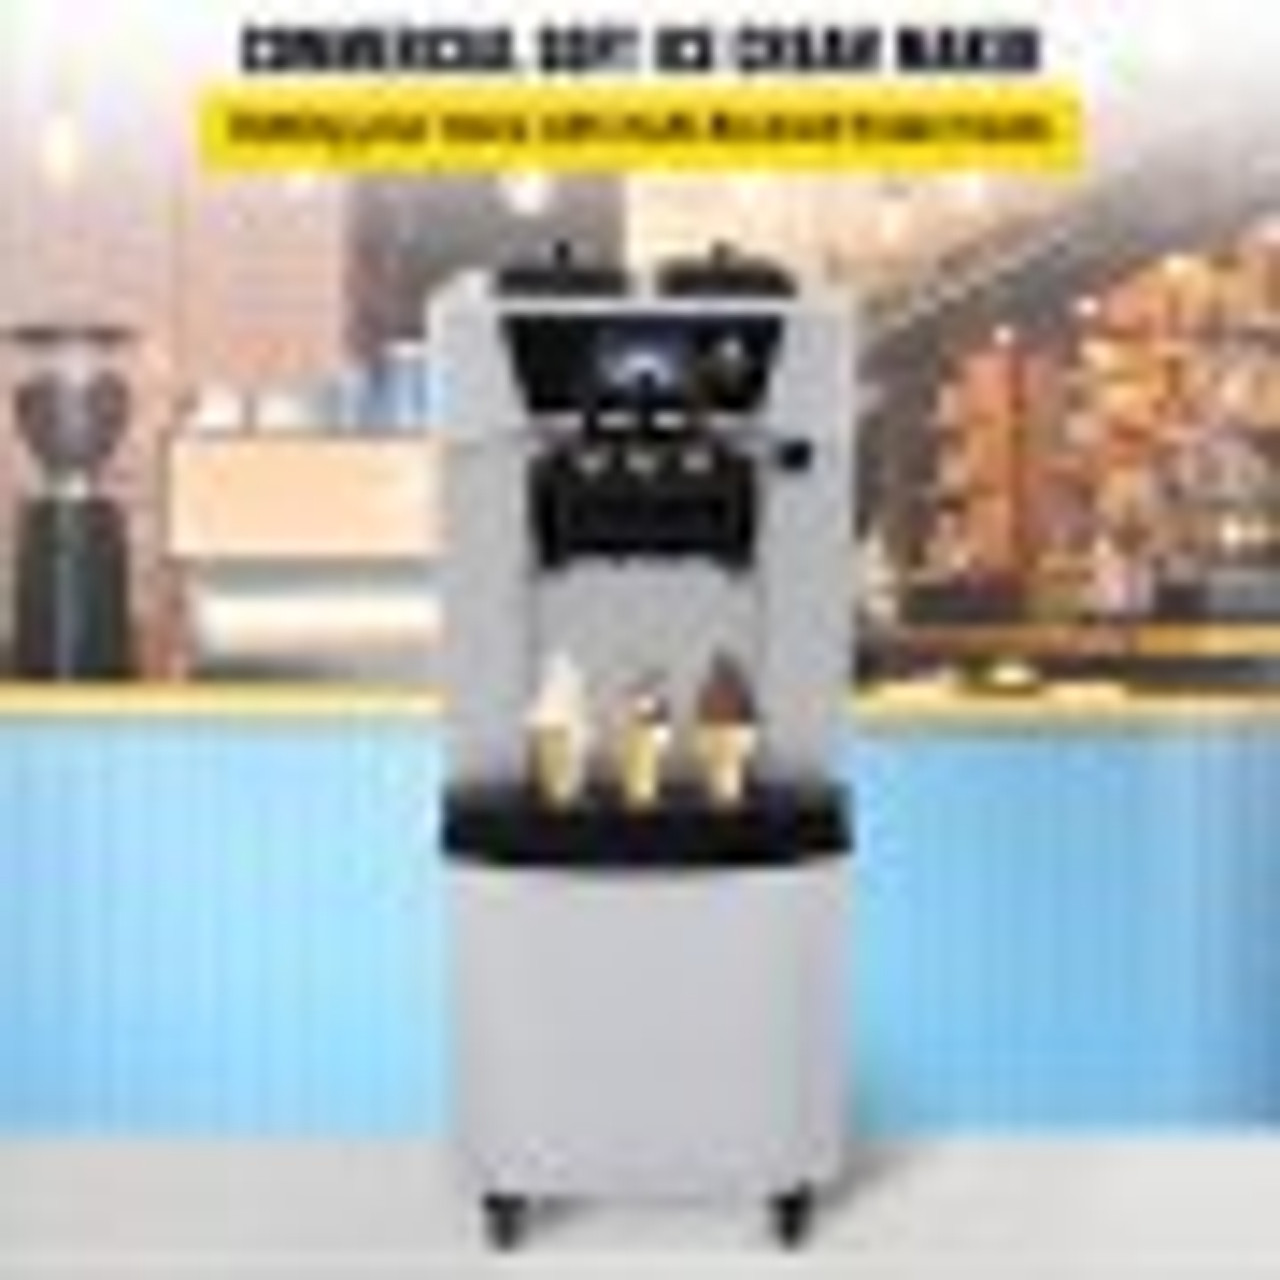 Commercial Ice Cream Maker, 10-20L/H Yield, 1000W Countertop Soft Serve  Machine with 4.5L